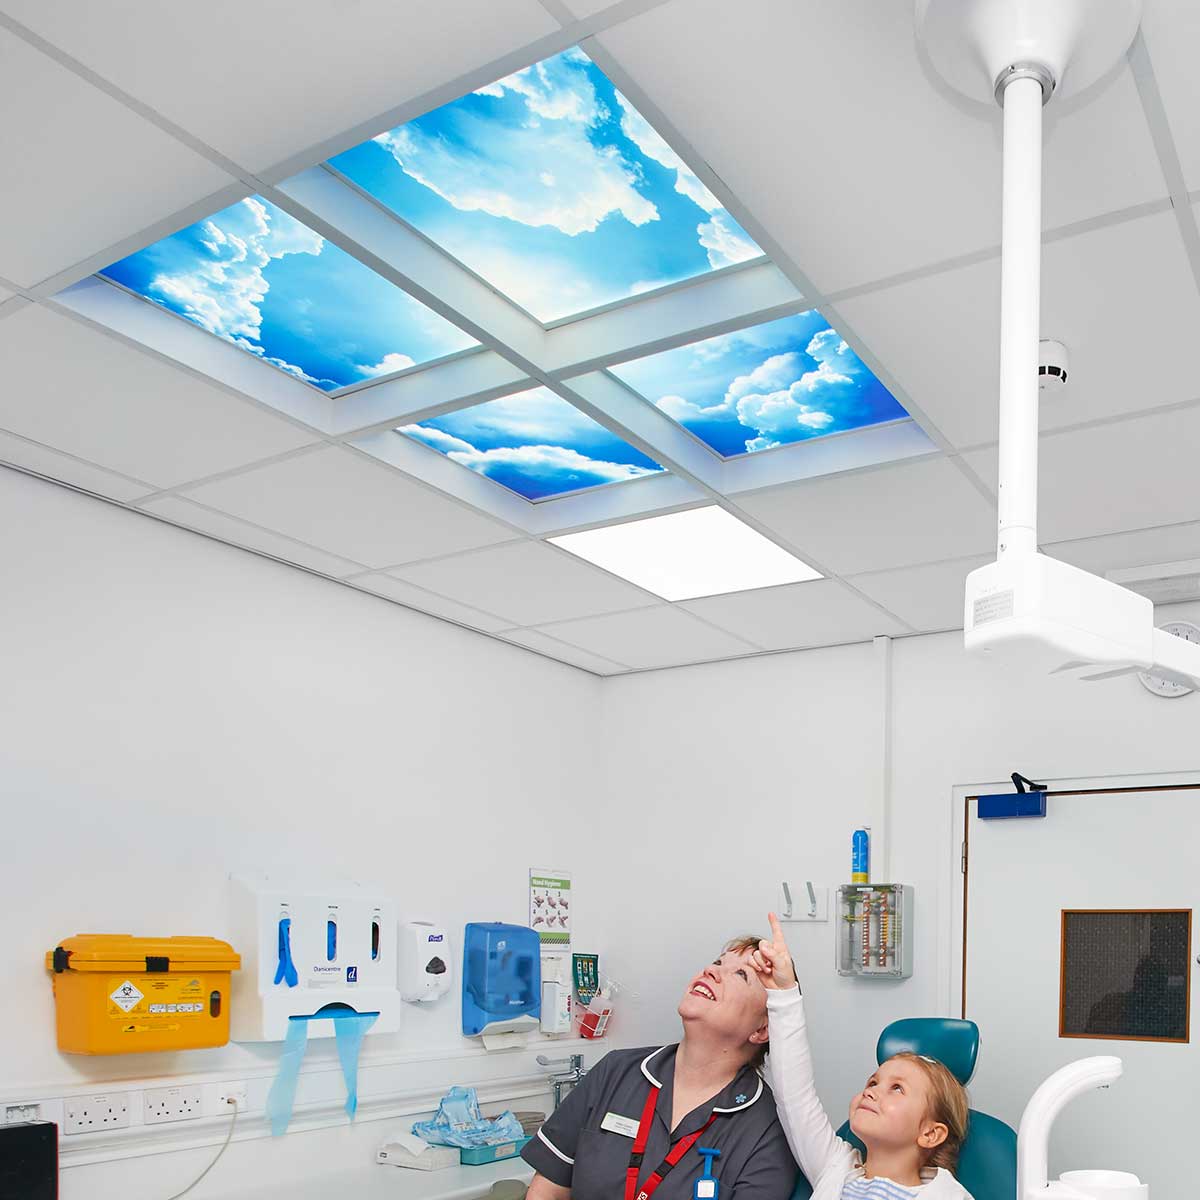 Nurse & little girl pointing & looking at LED ceiling lights which display a vivid bright blue sky with white clouds.